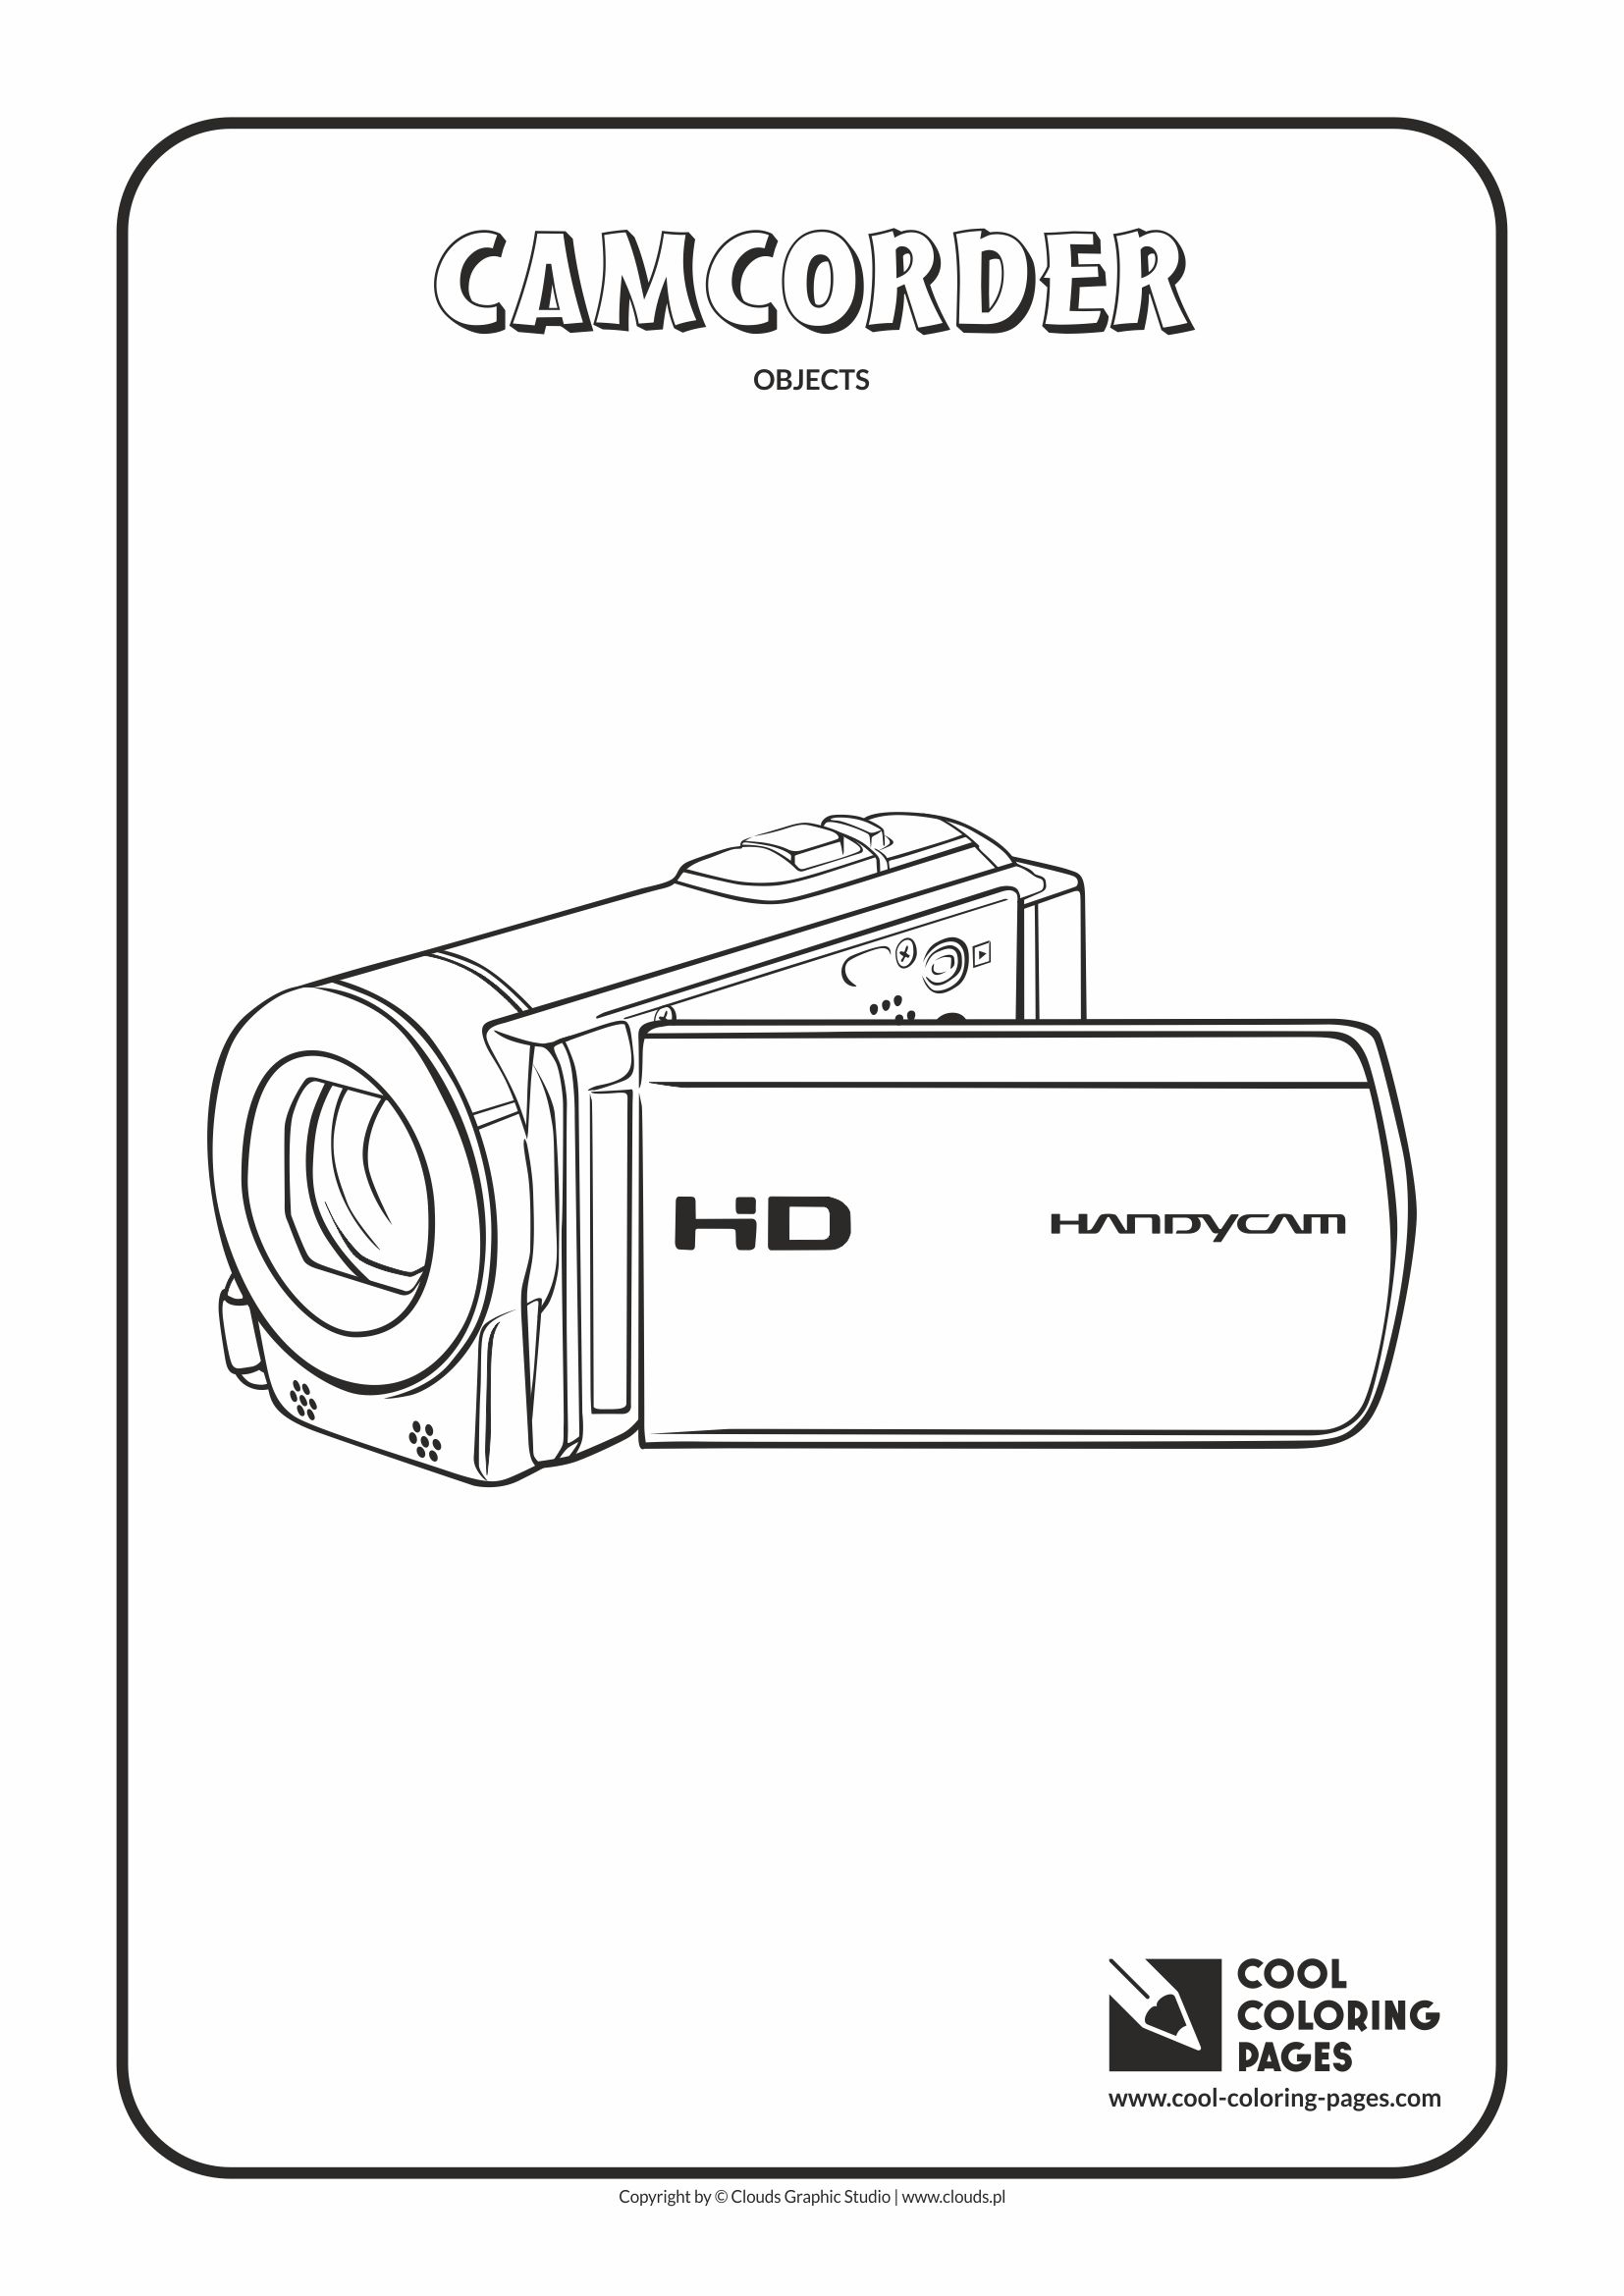 Cool Coloring Pages - Coloring objects / Camcorder